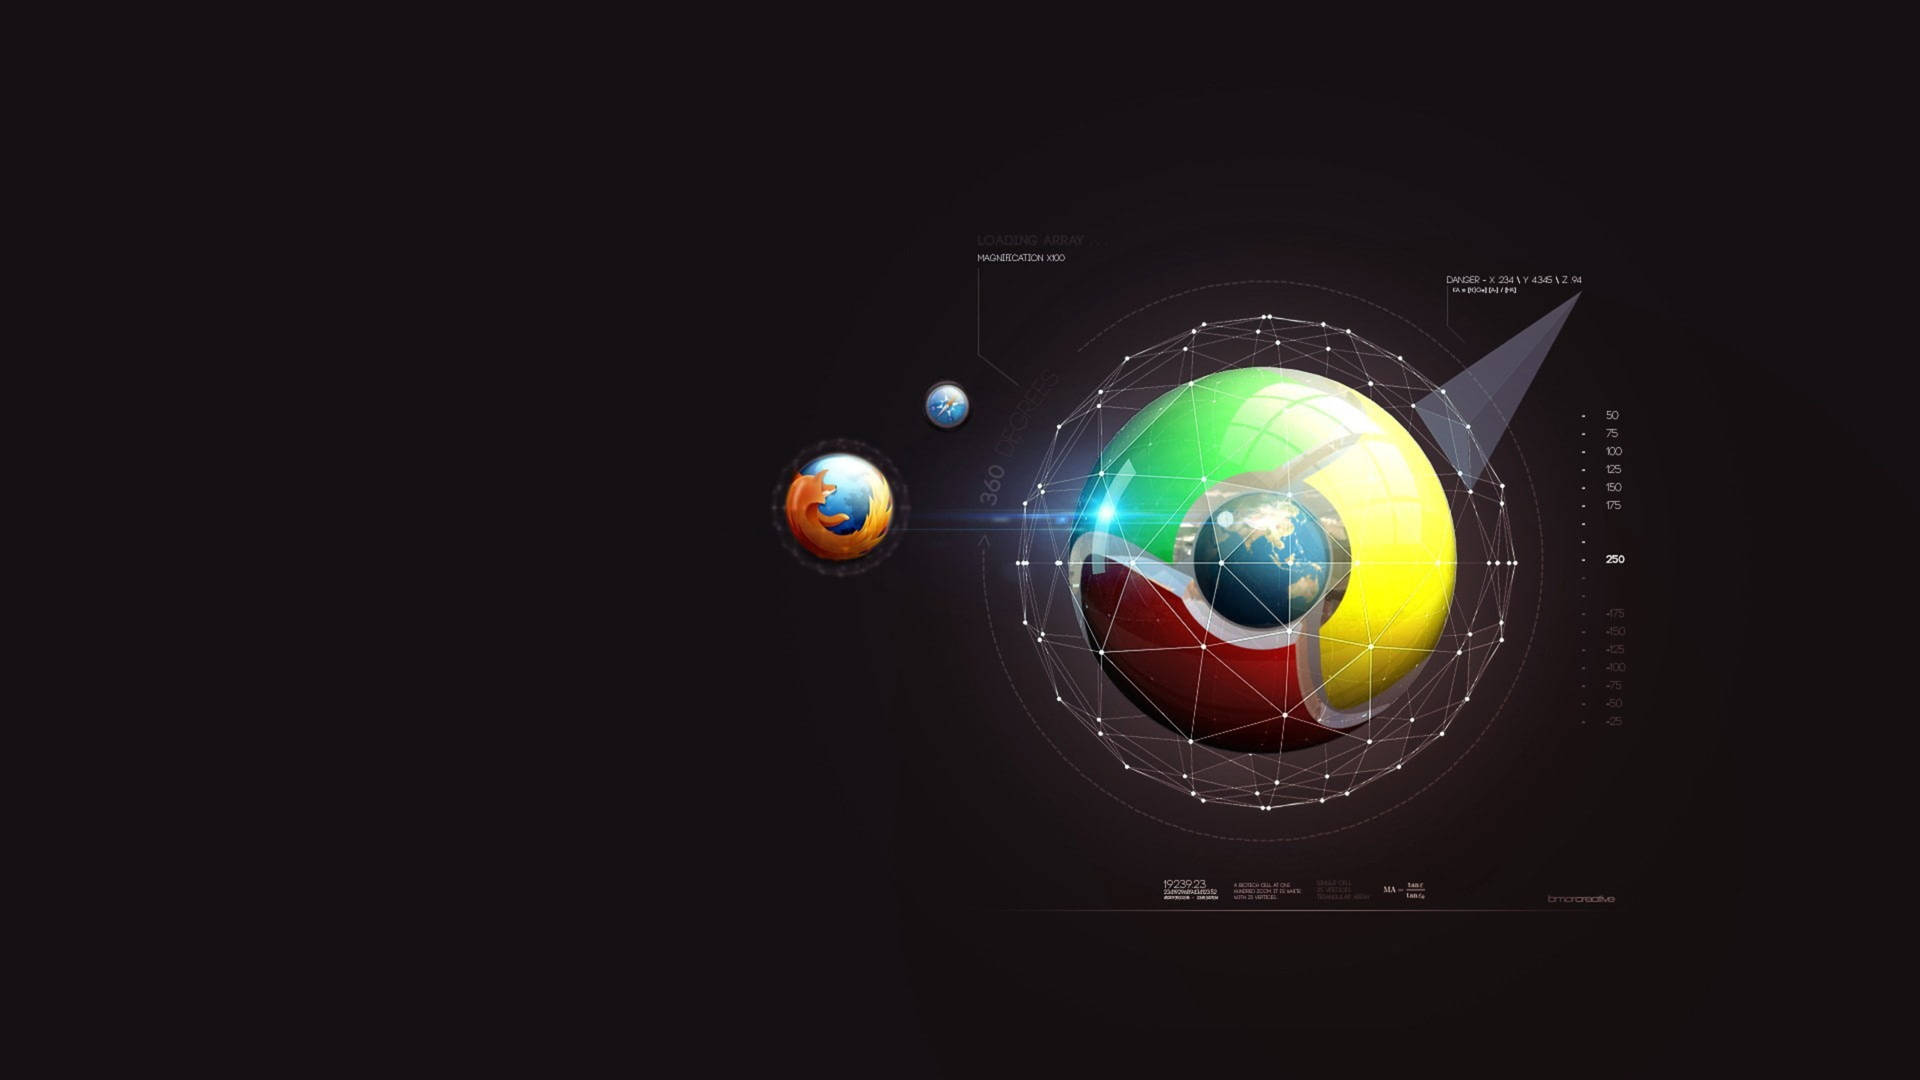 3840X2160 Google Chrome Wallpaper and Background